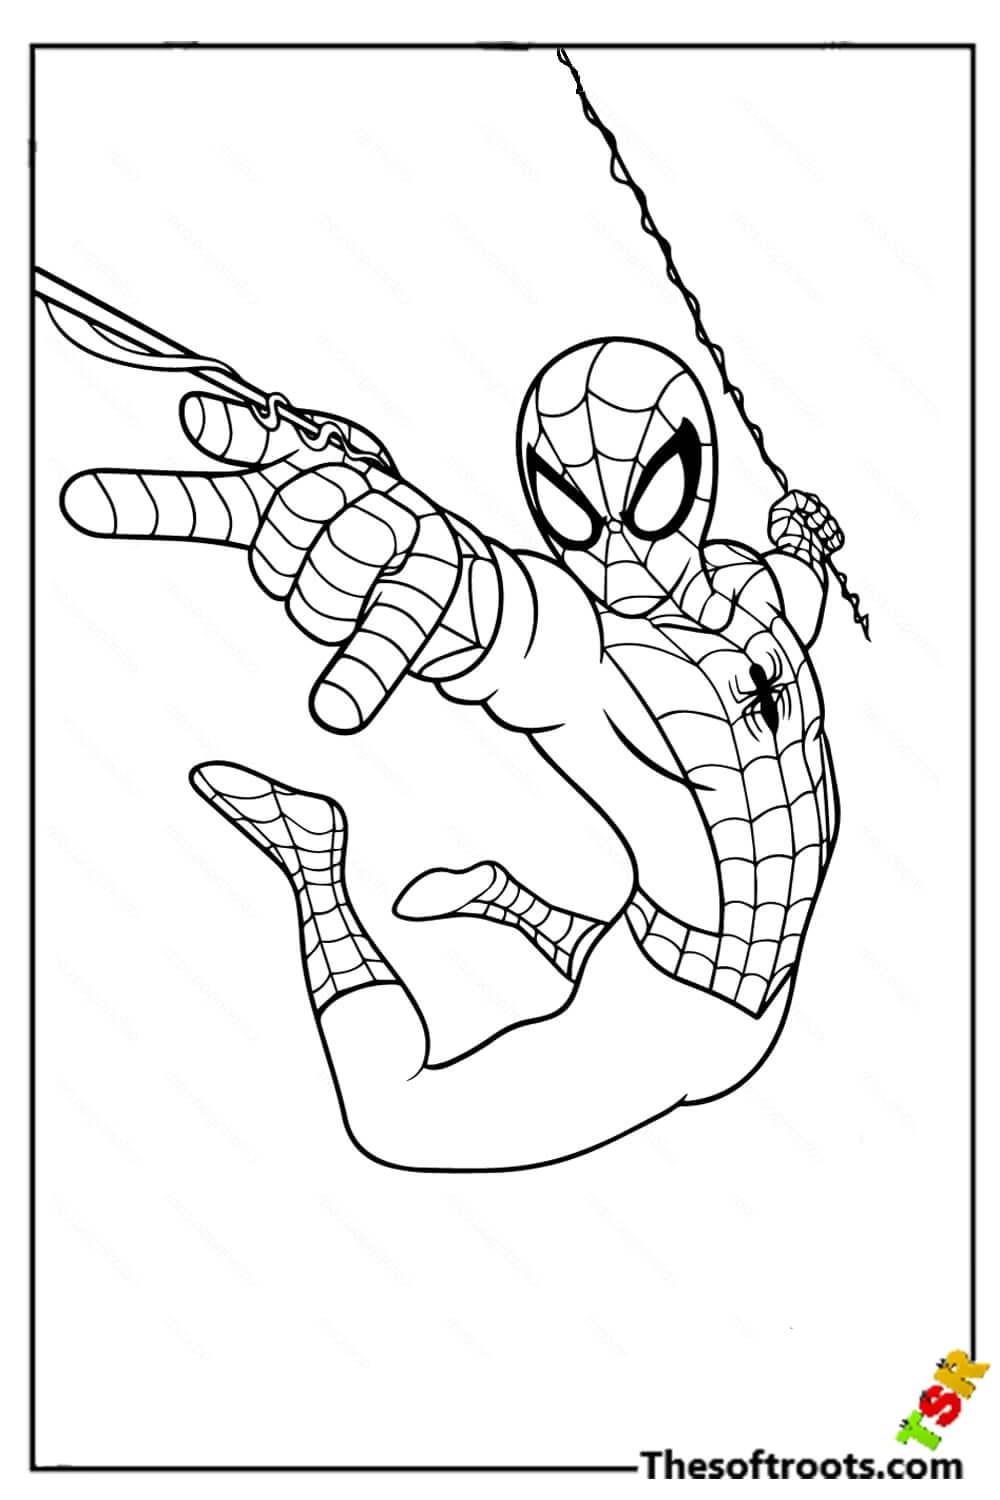 Spiderman in action coloring pages